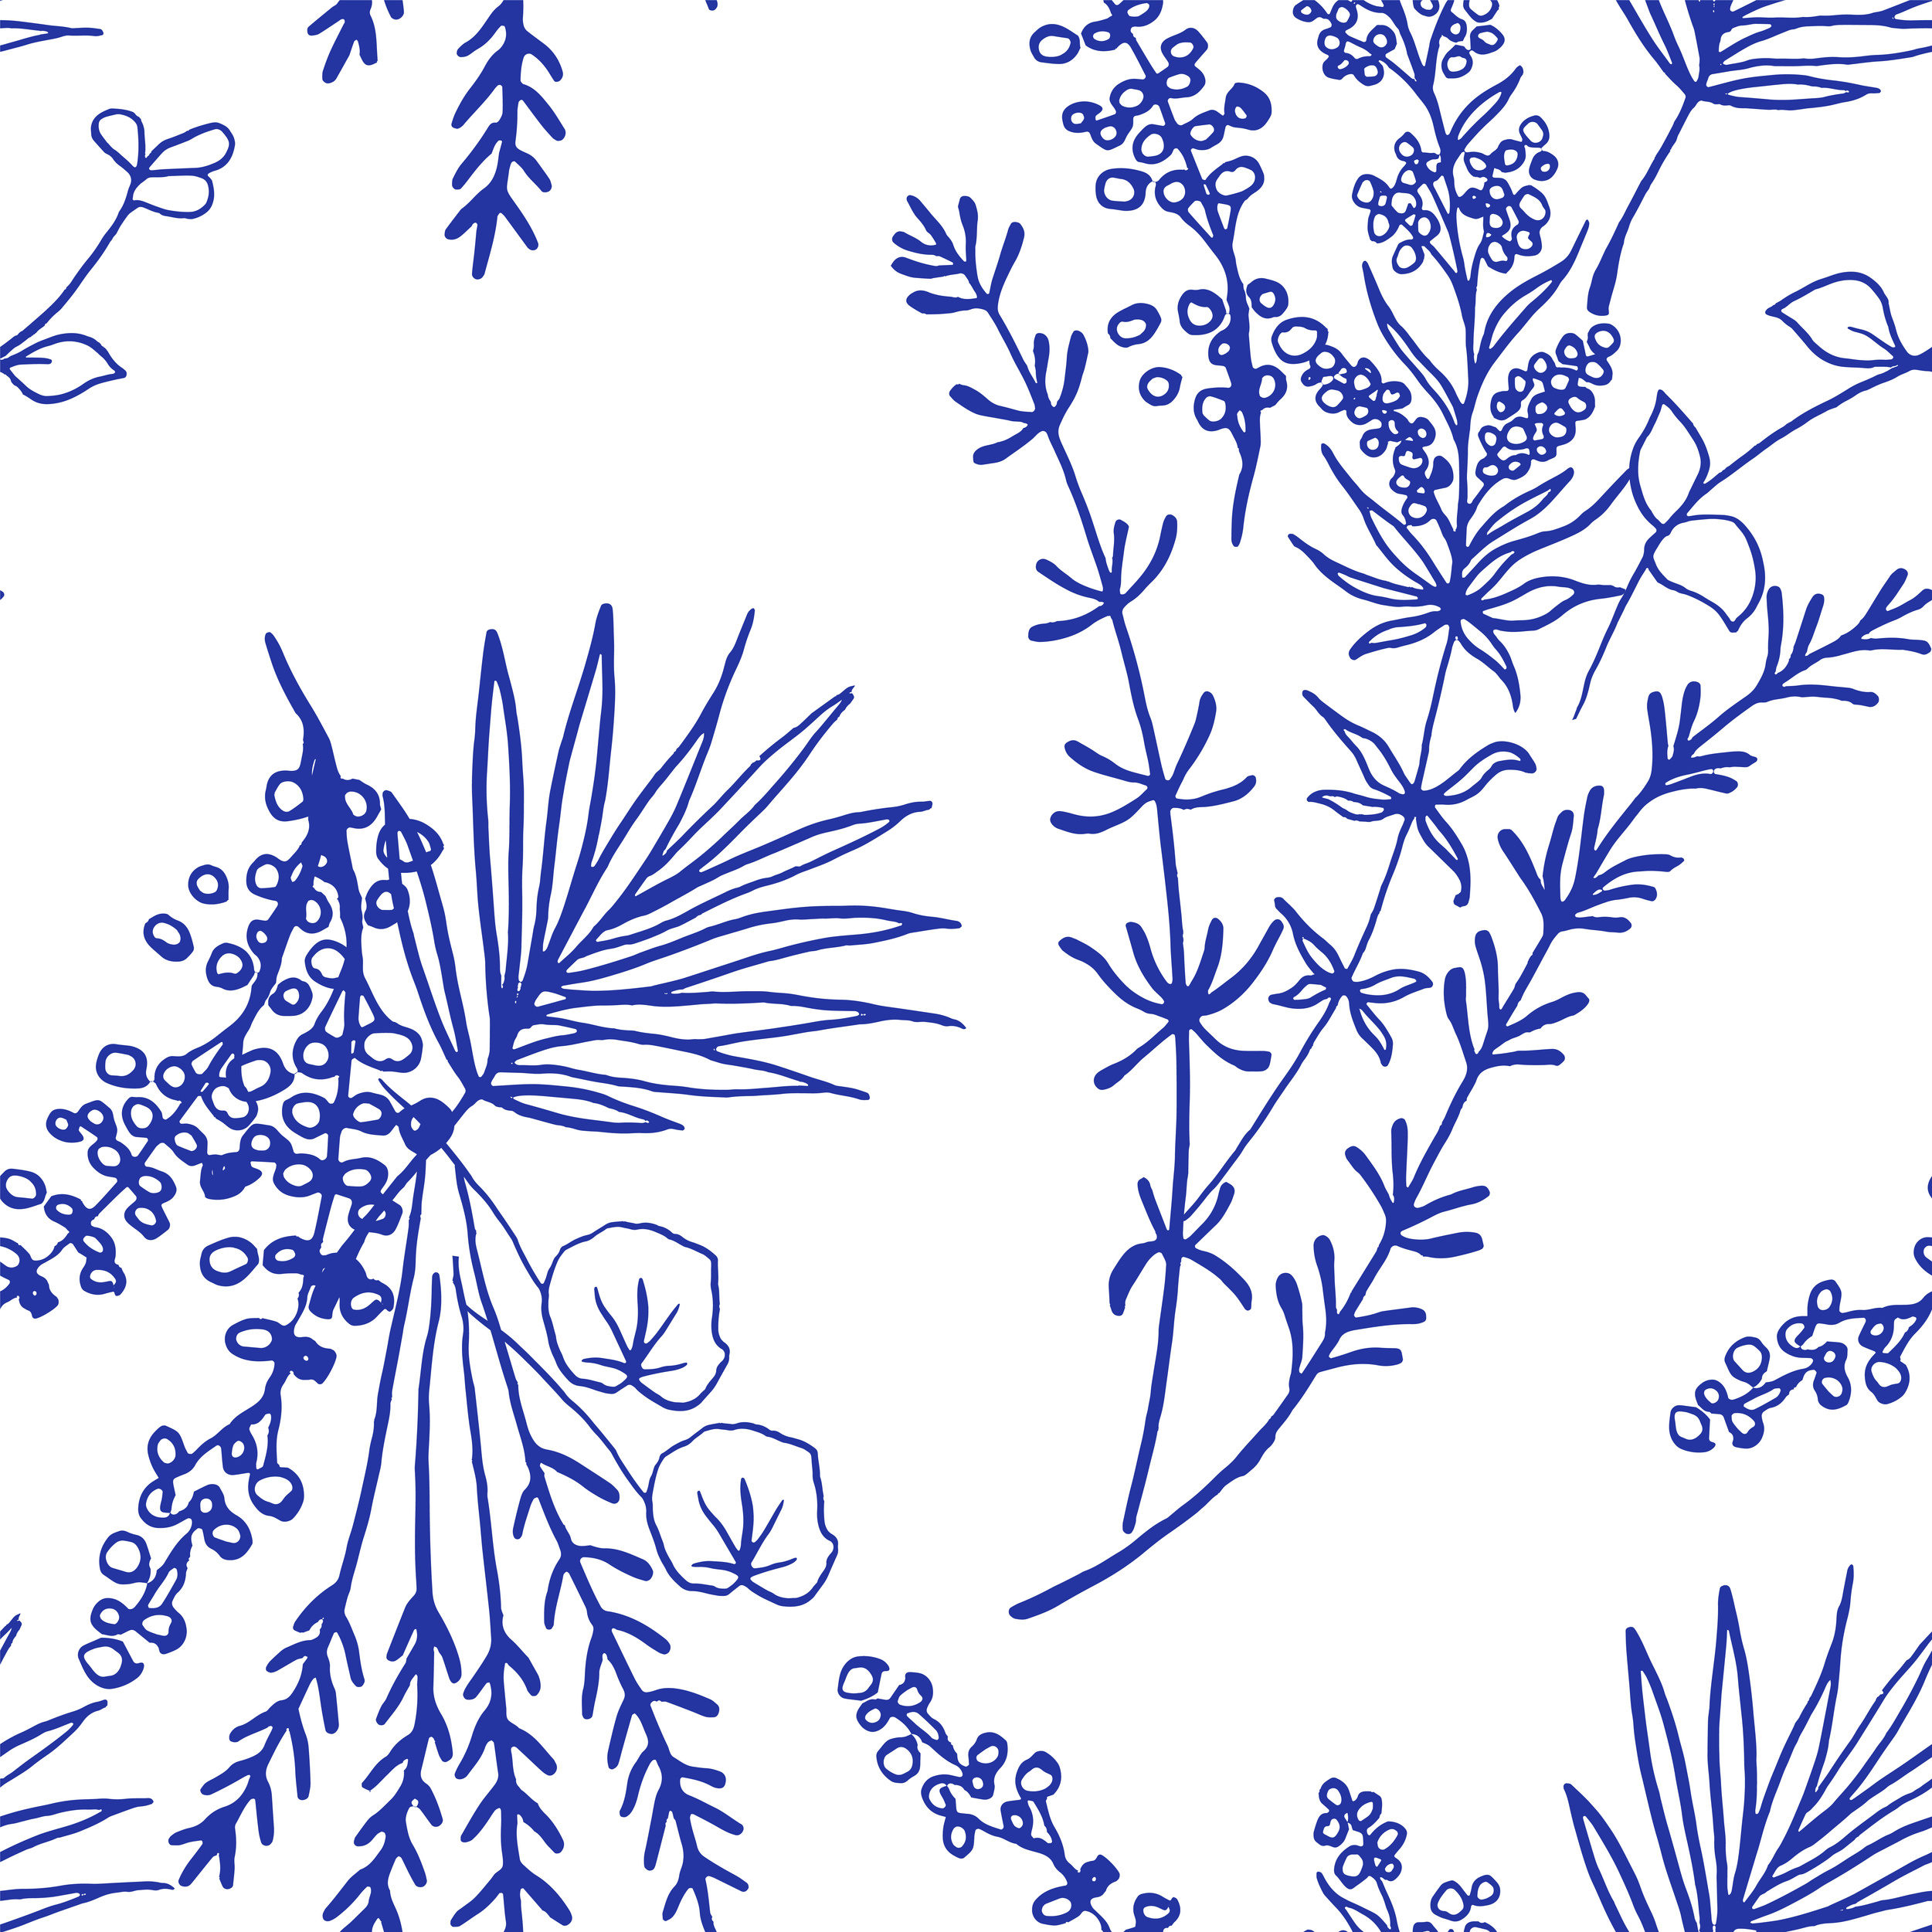 Seamless pattern with bouquet of Blue Herbs on white background.